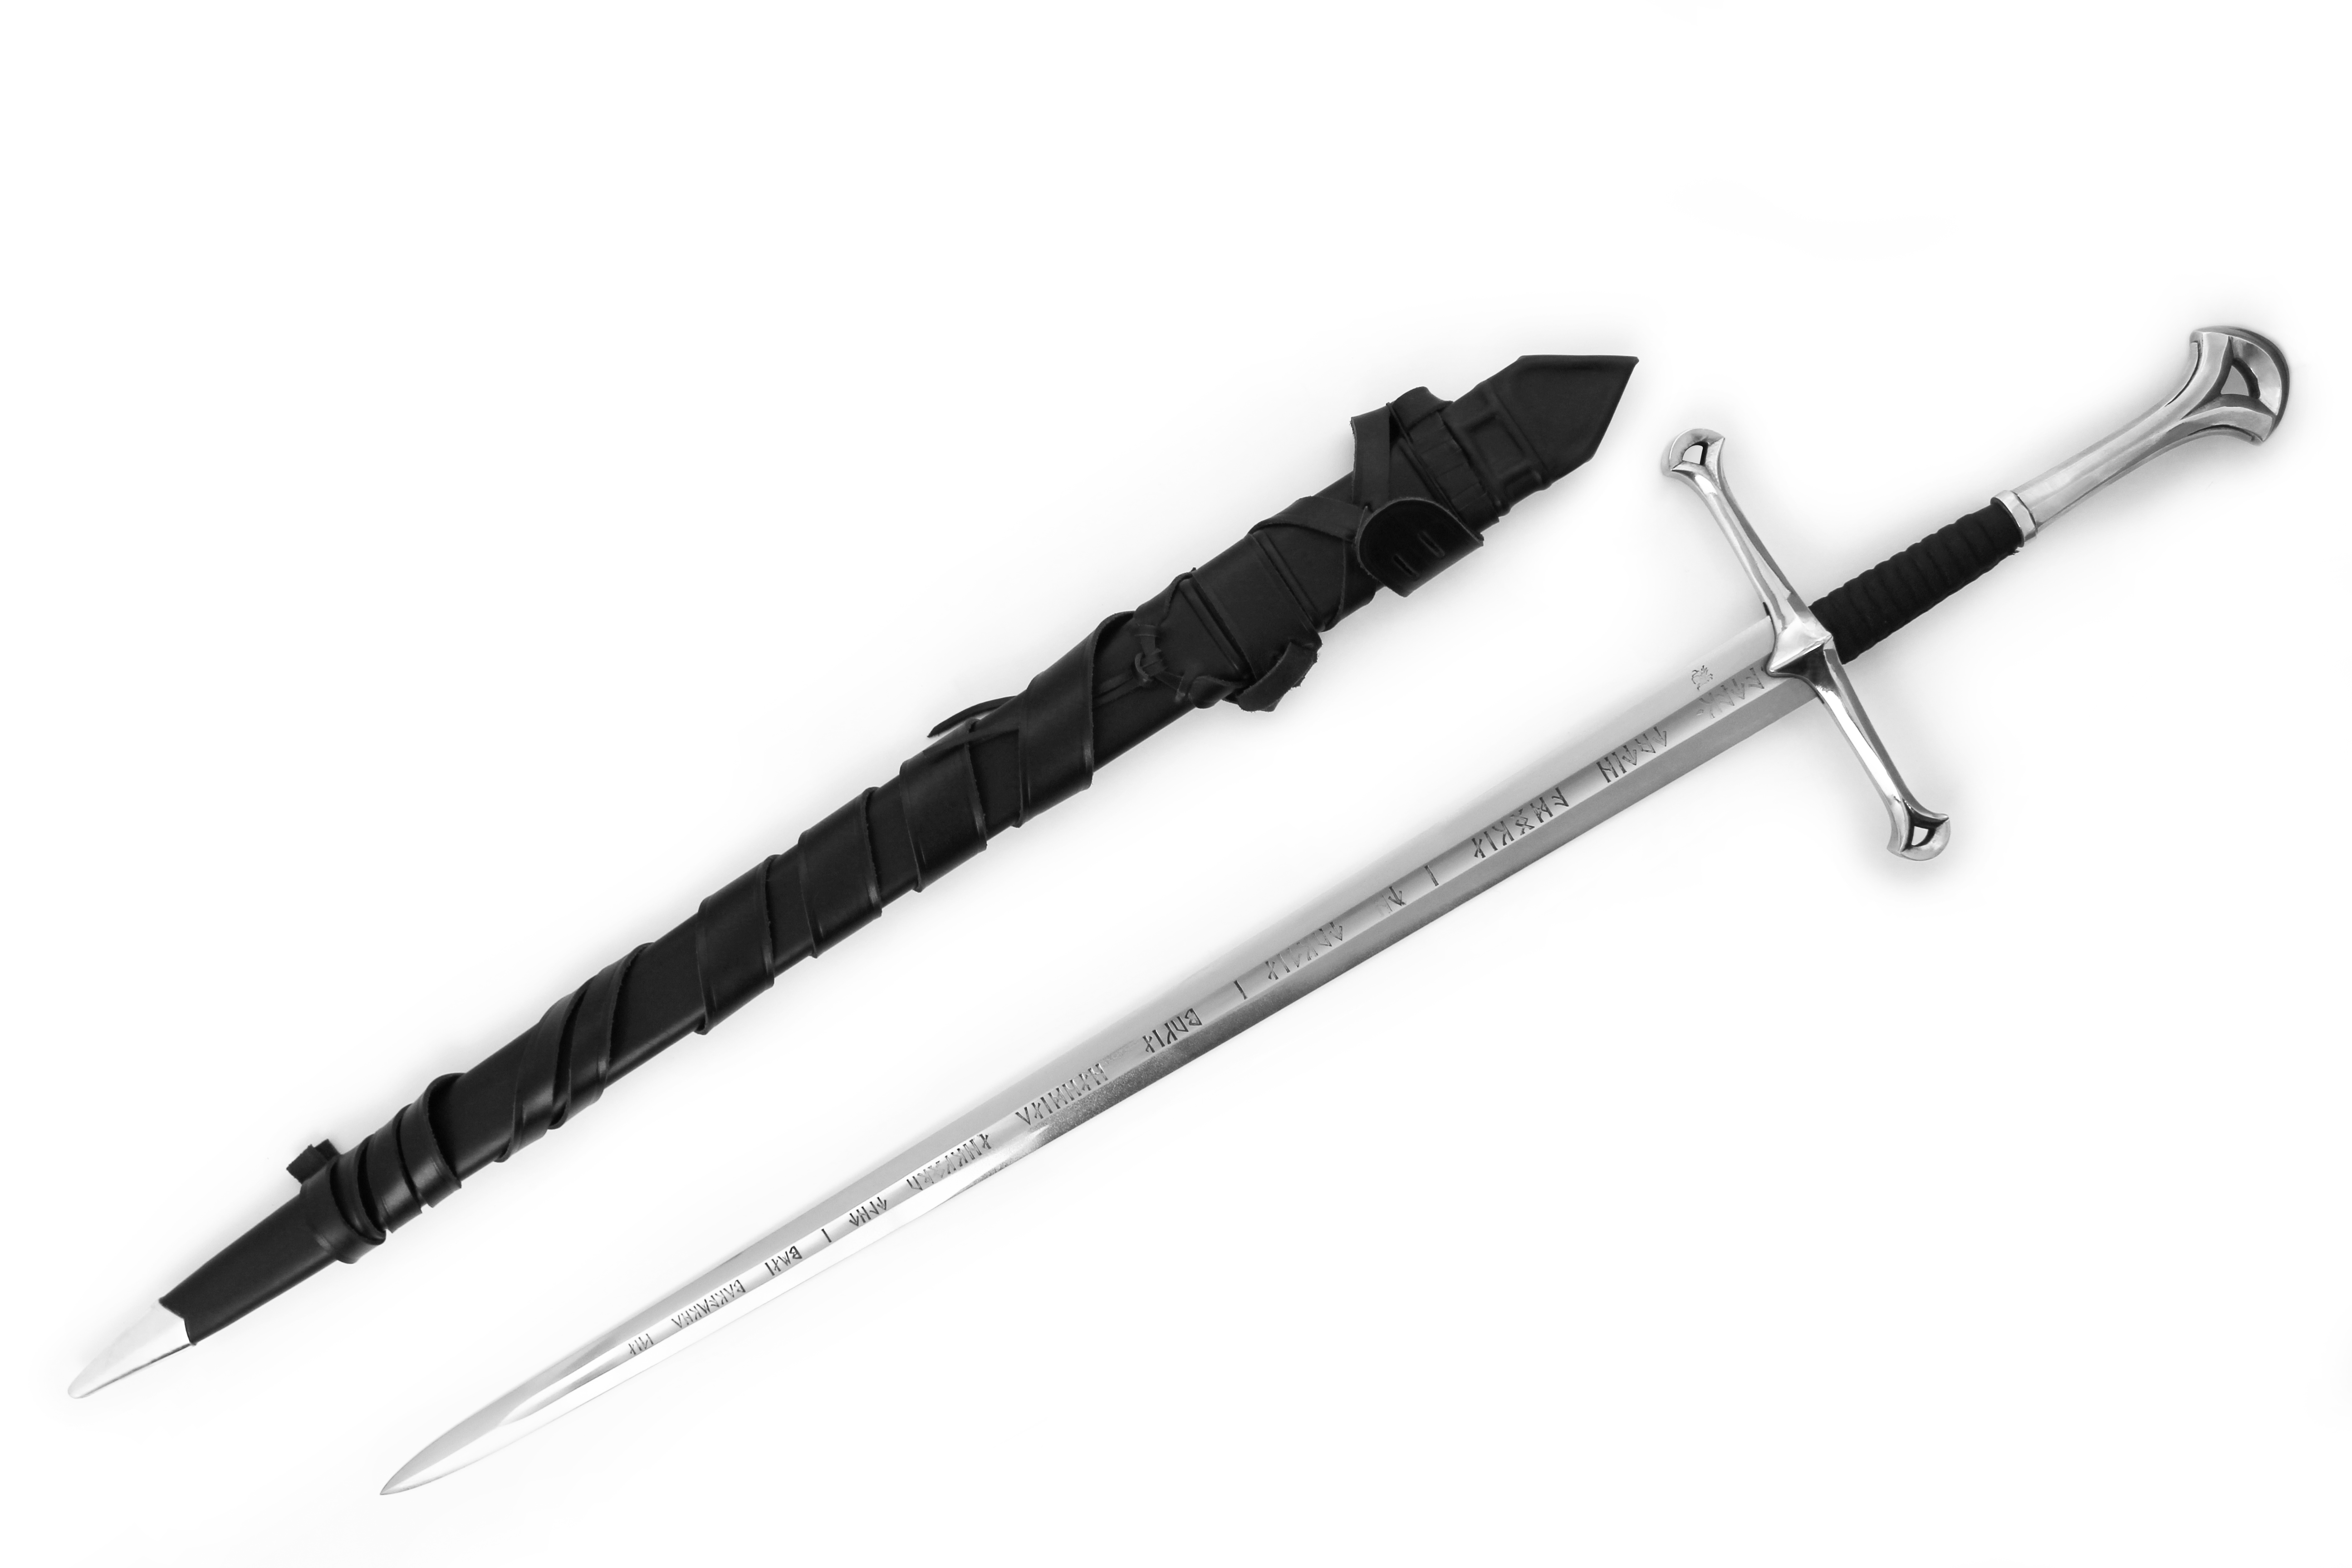 Sword - definition of sword by The Free Dictionary